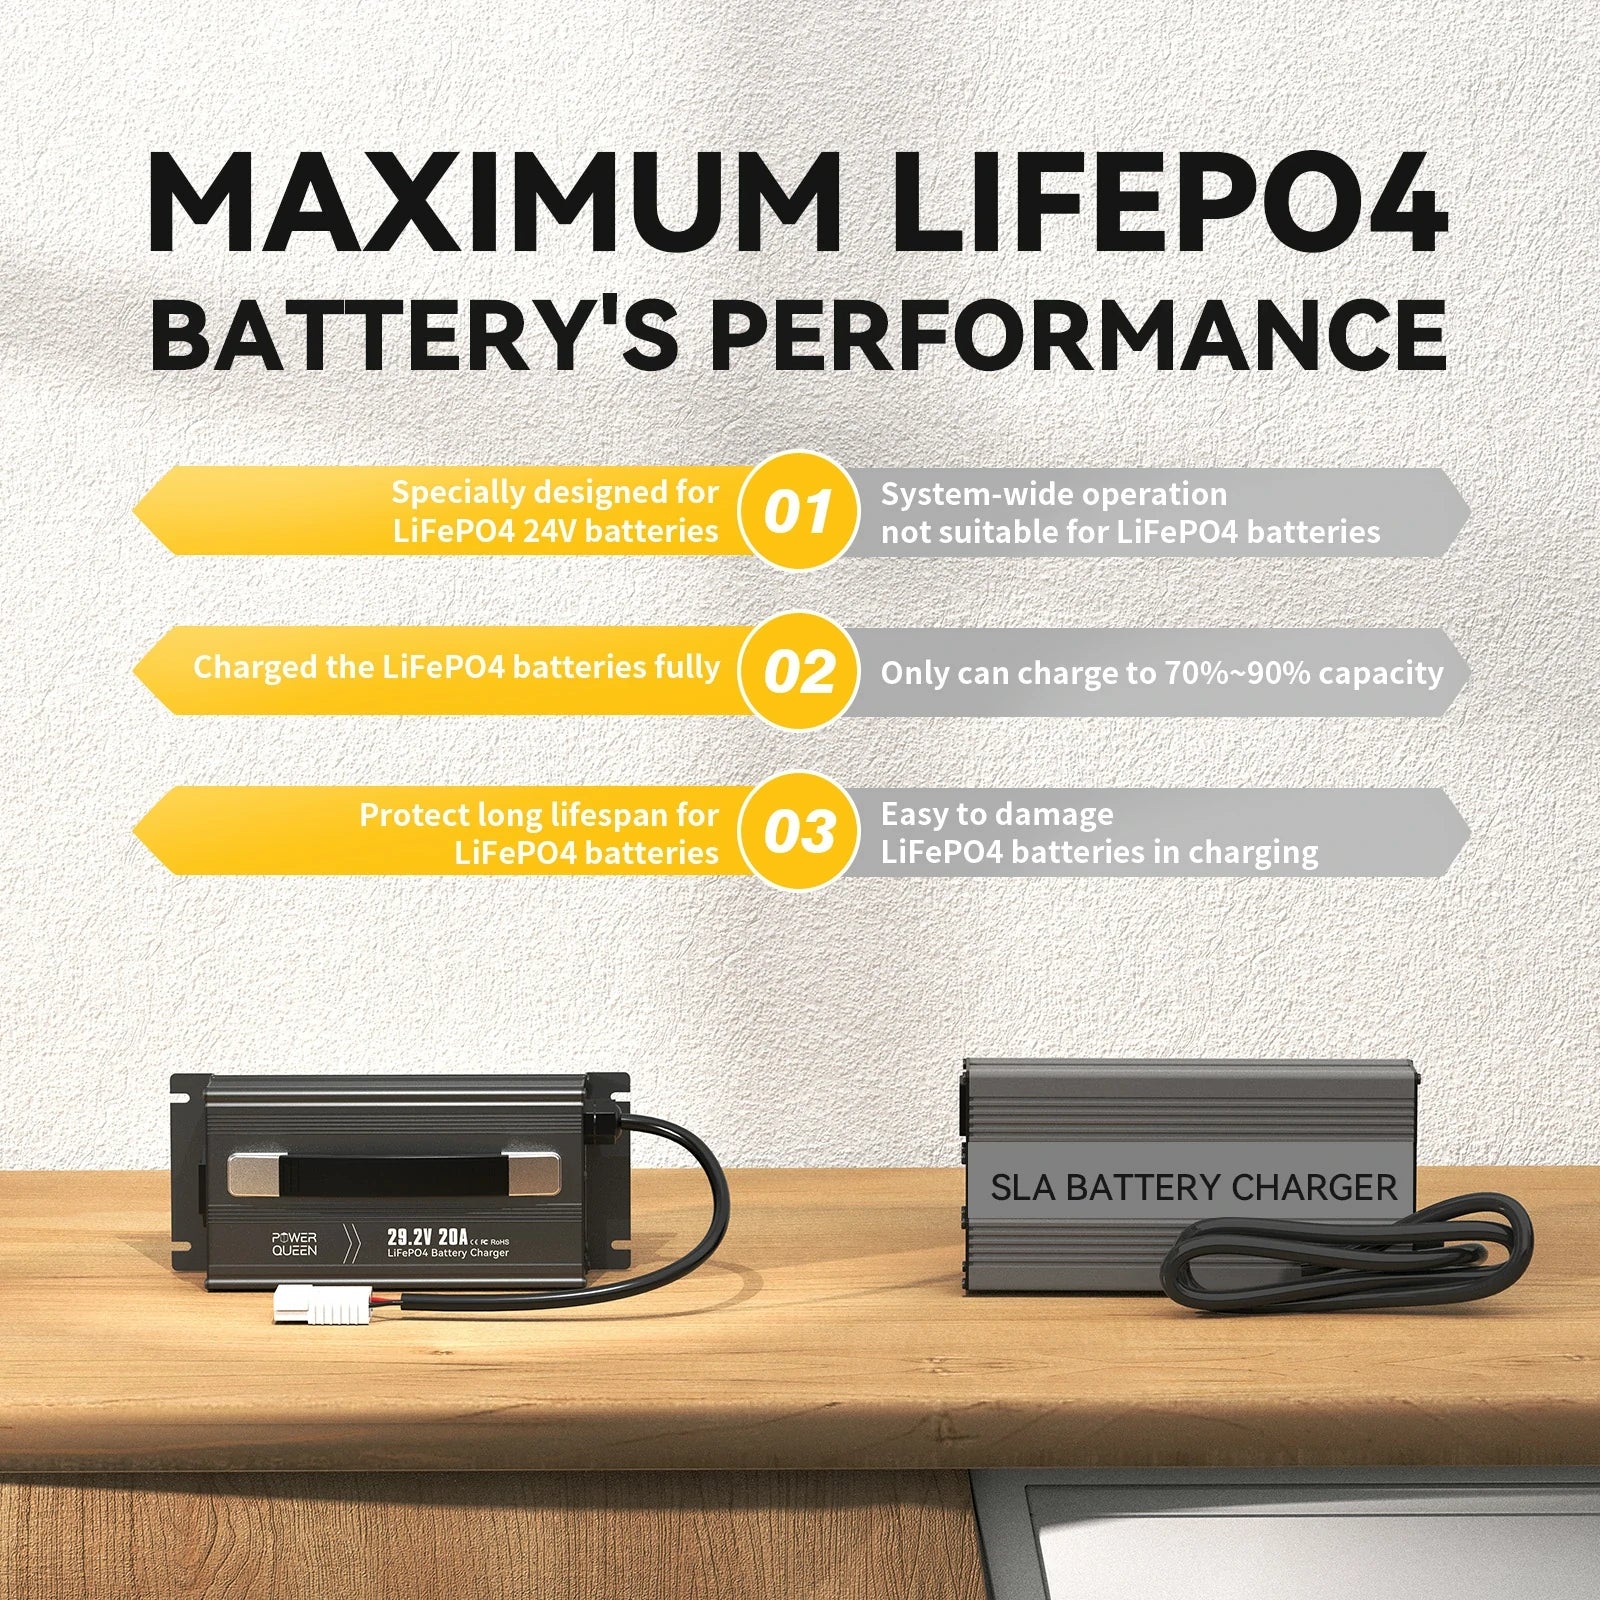 Power-Queen-24-volt-LiFePO4-Battery-charger-compared-With-Sla-battery-charger